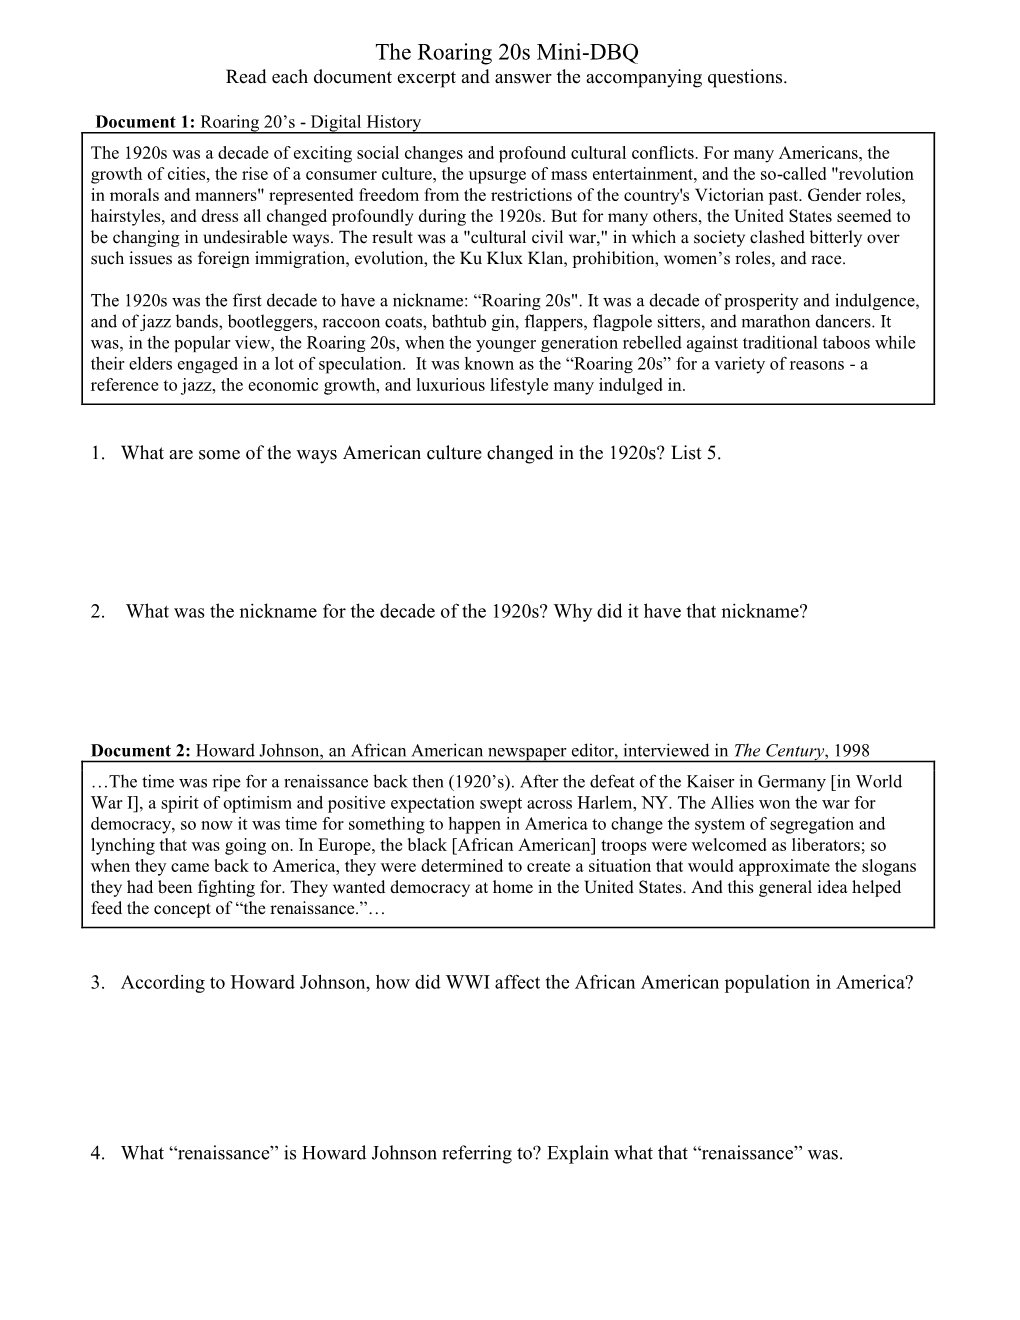 The Roaring 20S Mini-DBQ Read Each Document Excerpt and Answer the Accompanying Questions